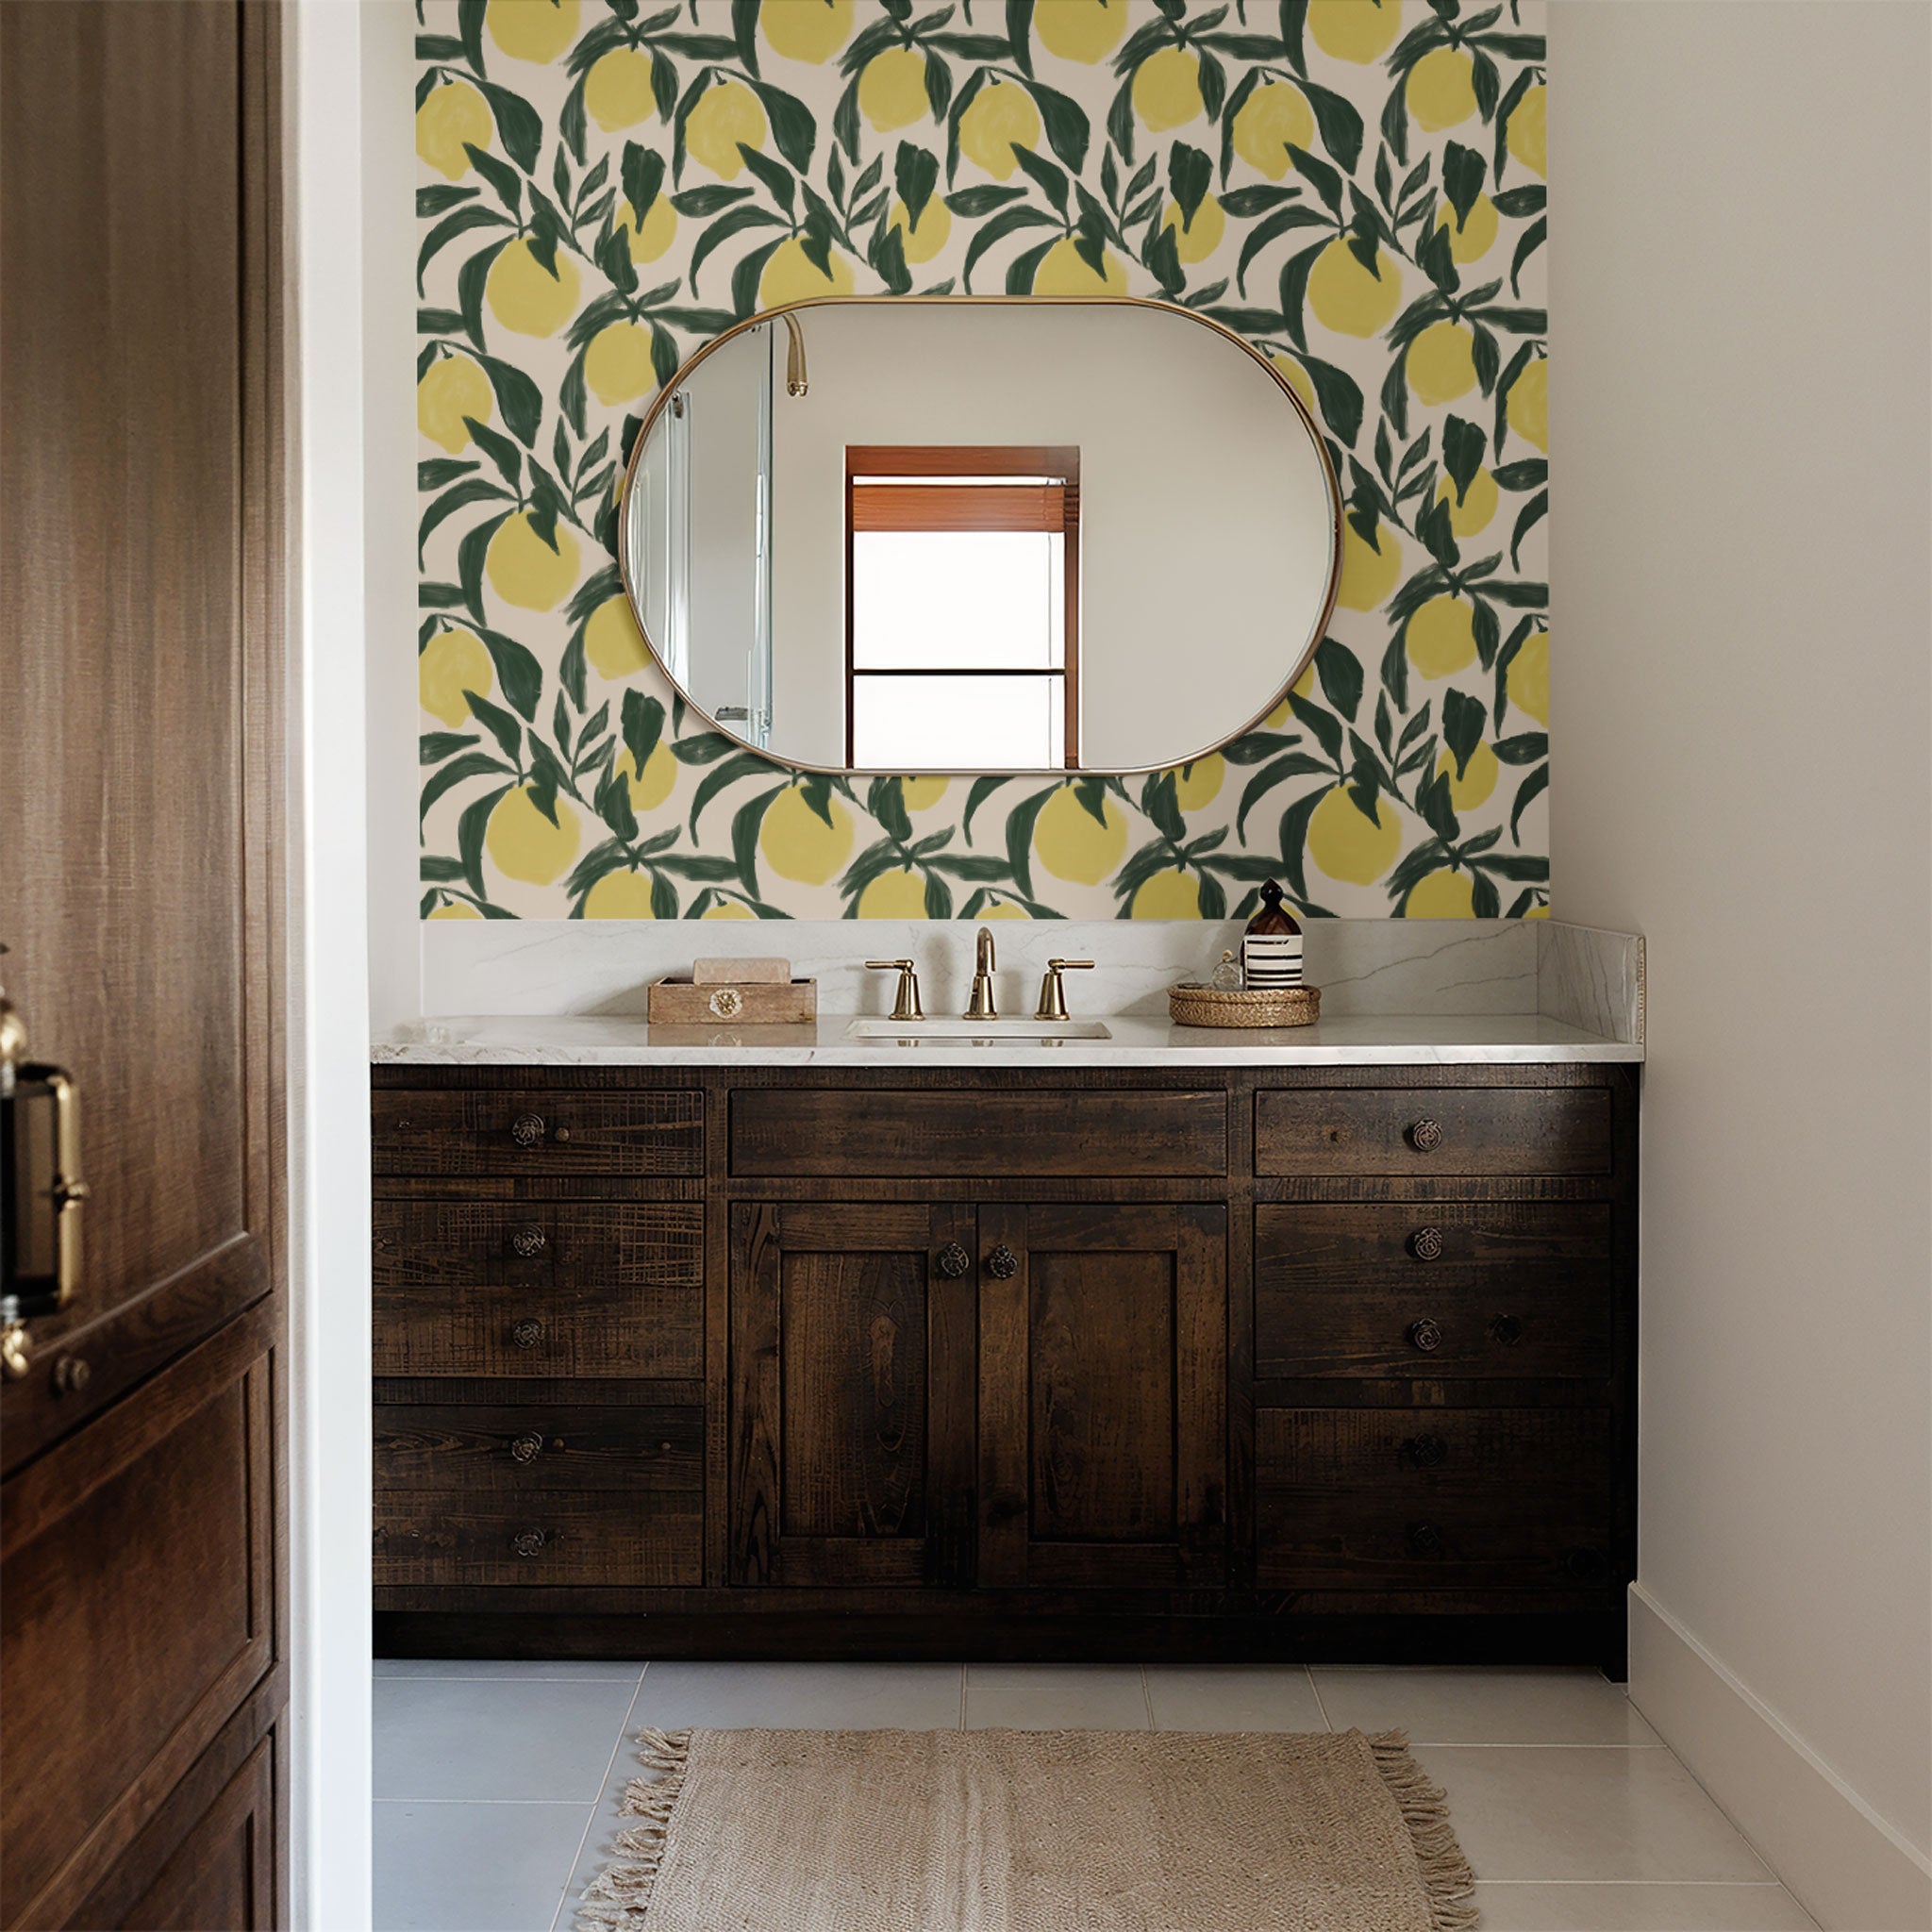 "Wall Blush Zesty Wallpaper in a stylish bathroom, yellow and green lemon pattern, focus on wall decor."